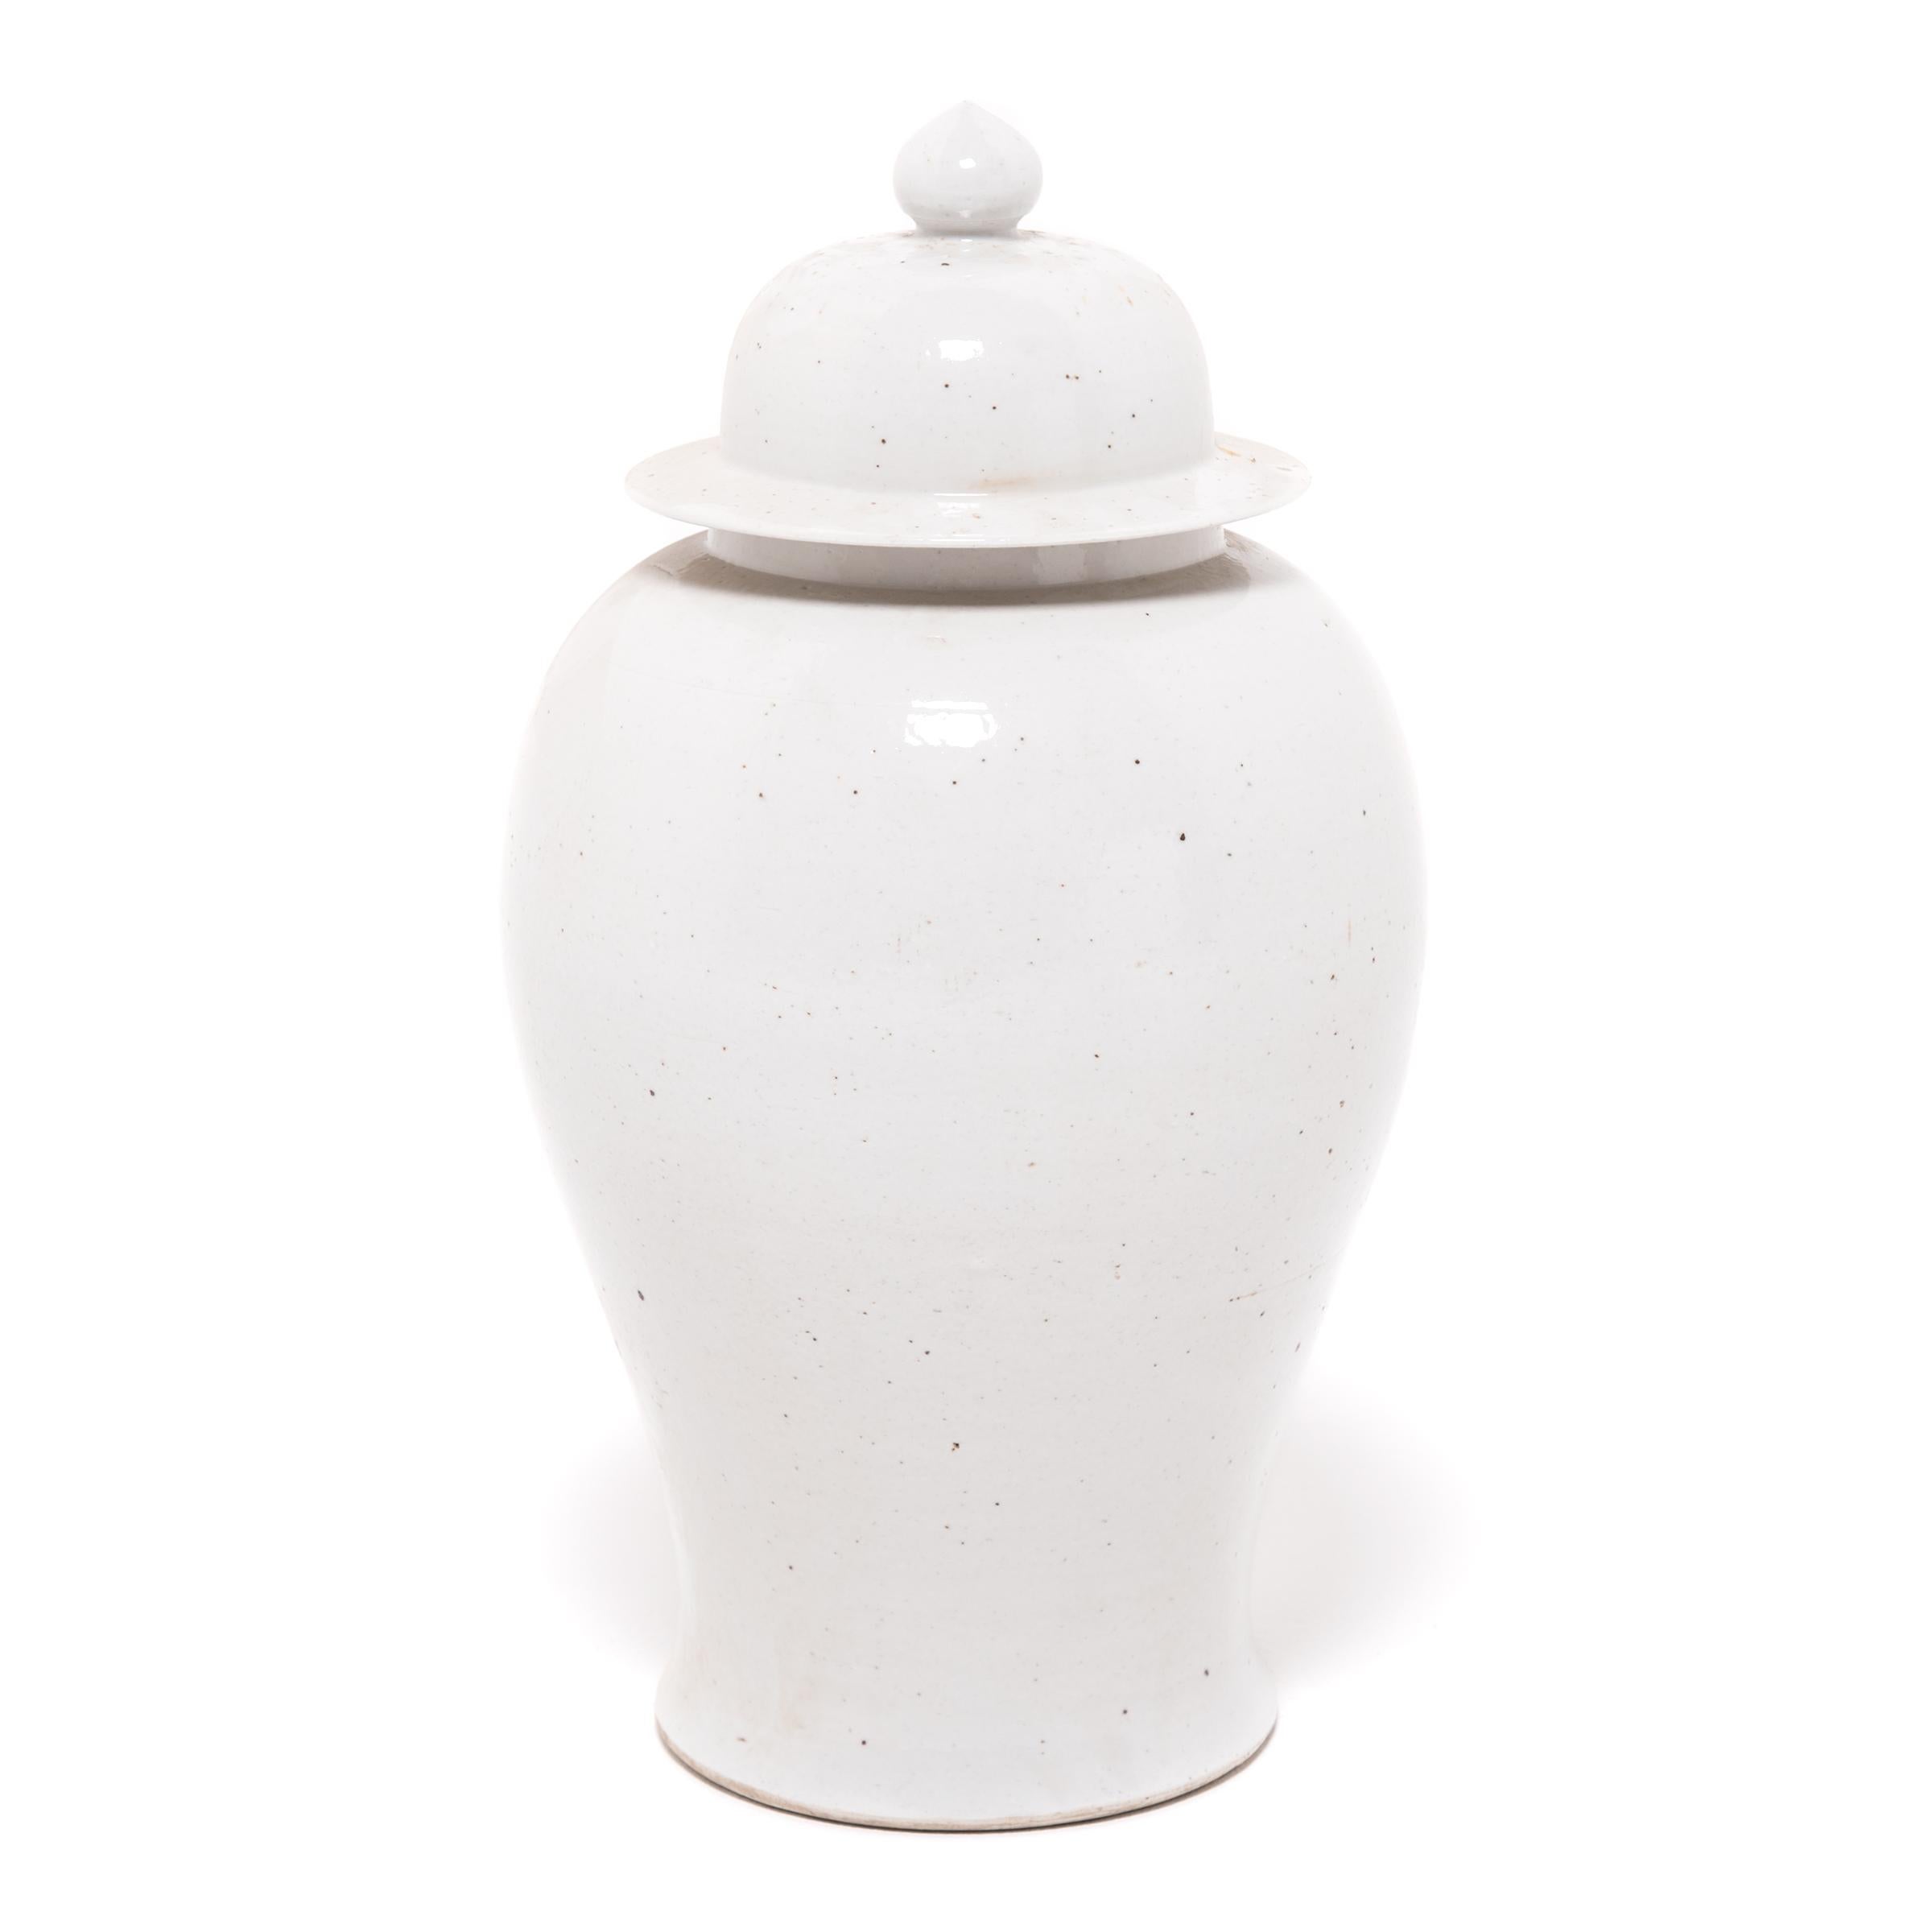 White Glazed Chinese Baluster Jar In Good Condition For Sale In Chicago, IL